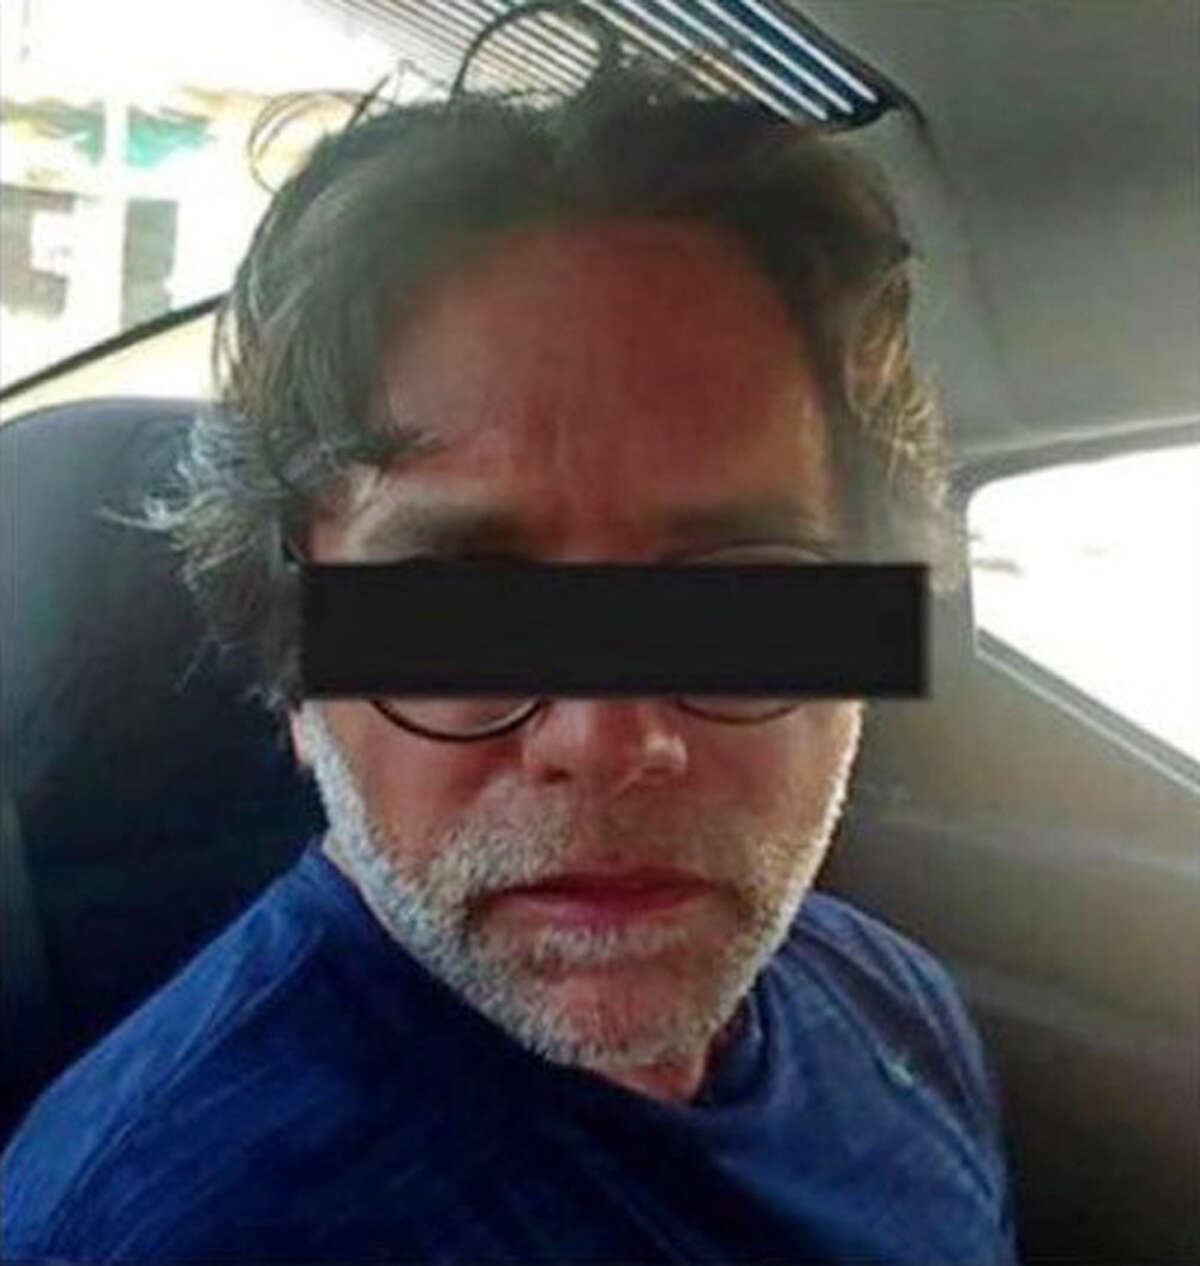 Keith Raniere is pictured following his arrest by Mexican federal authorities this week. (Photo courtesy Frank Parlato/ArtVoice)